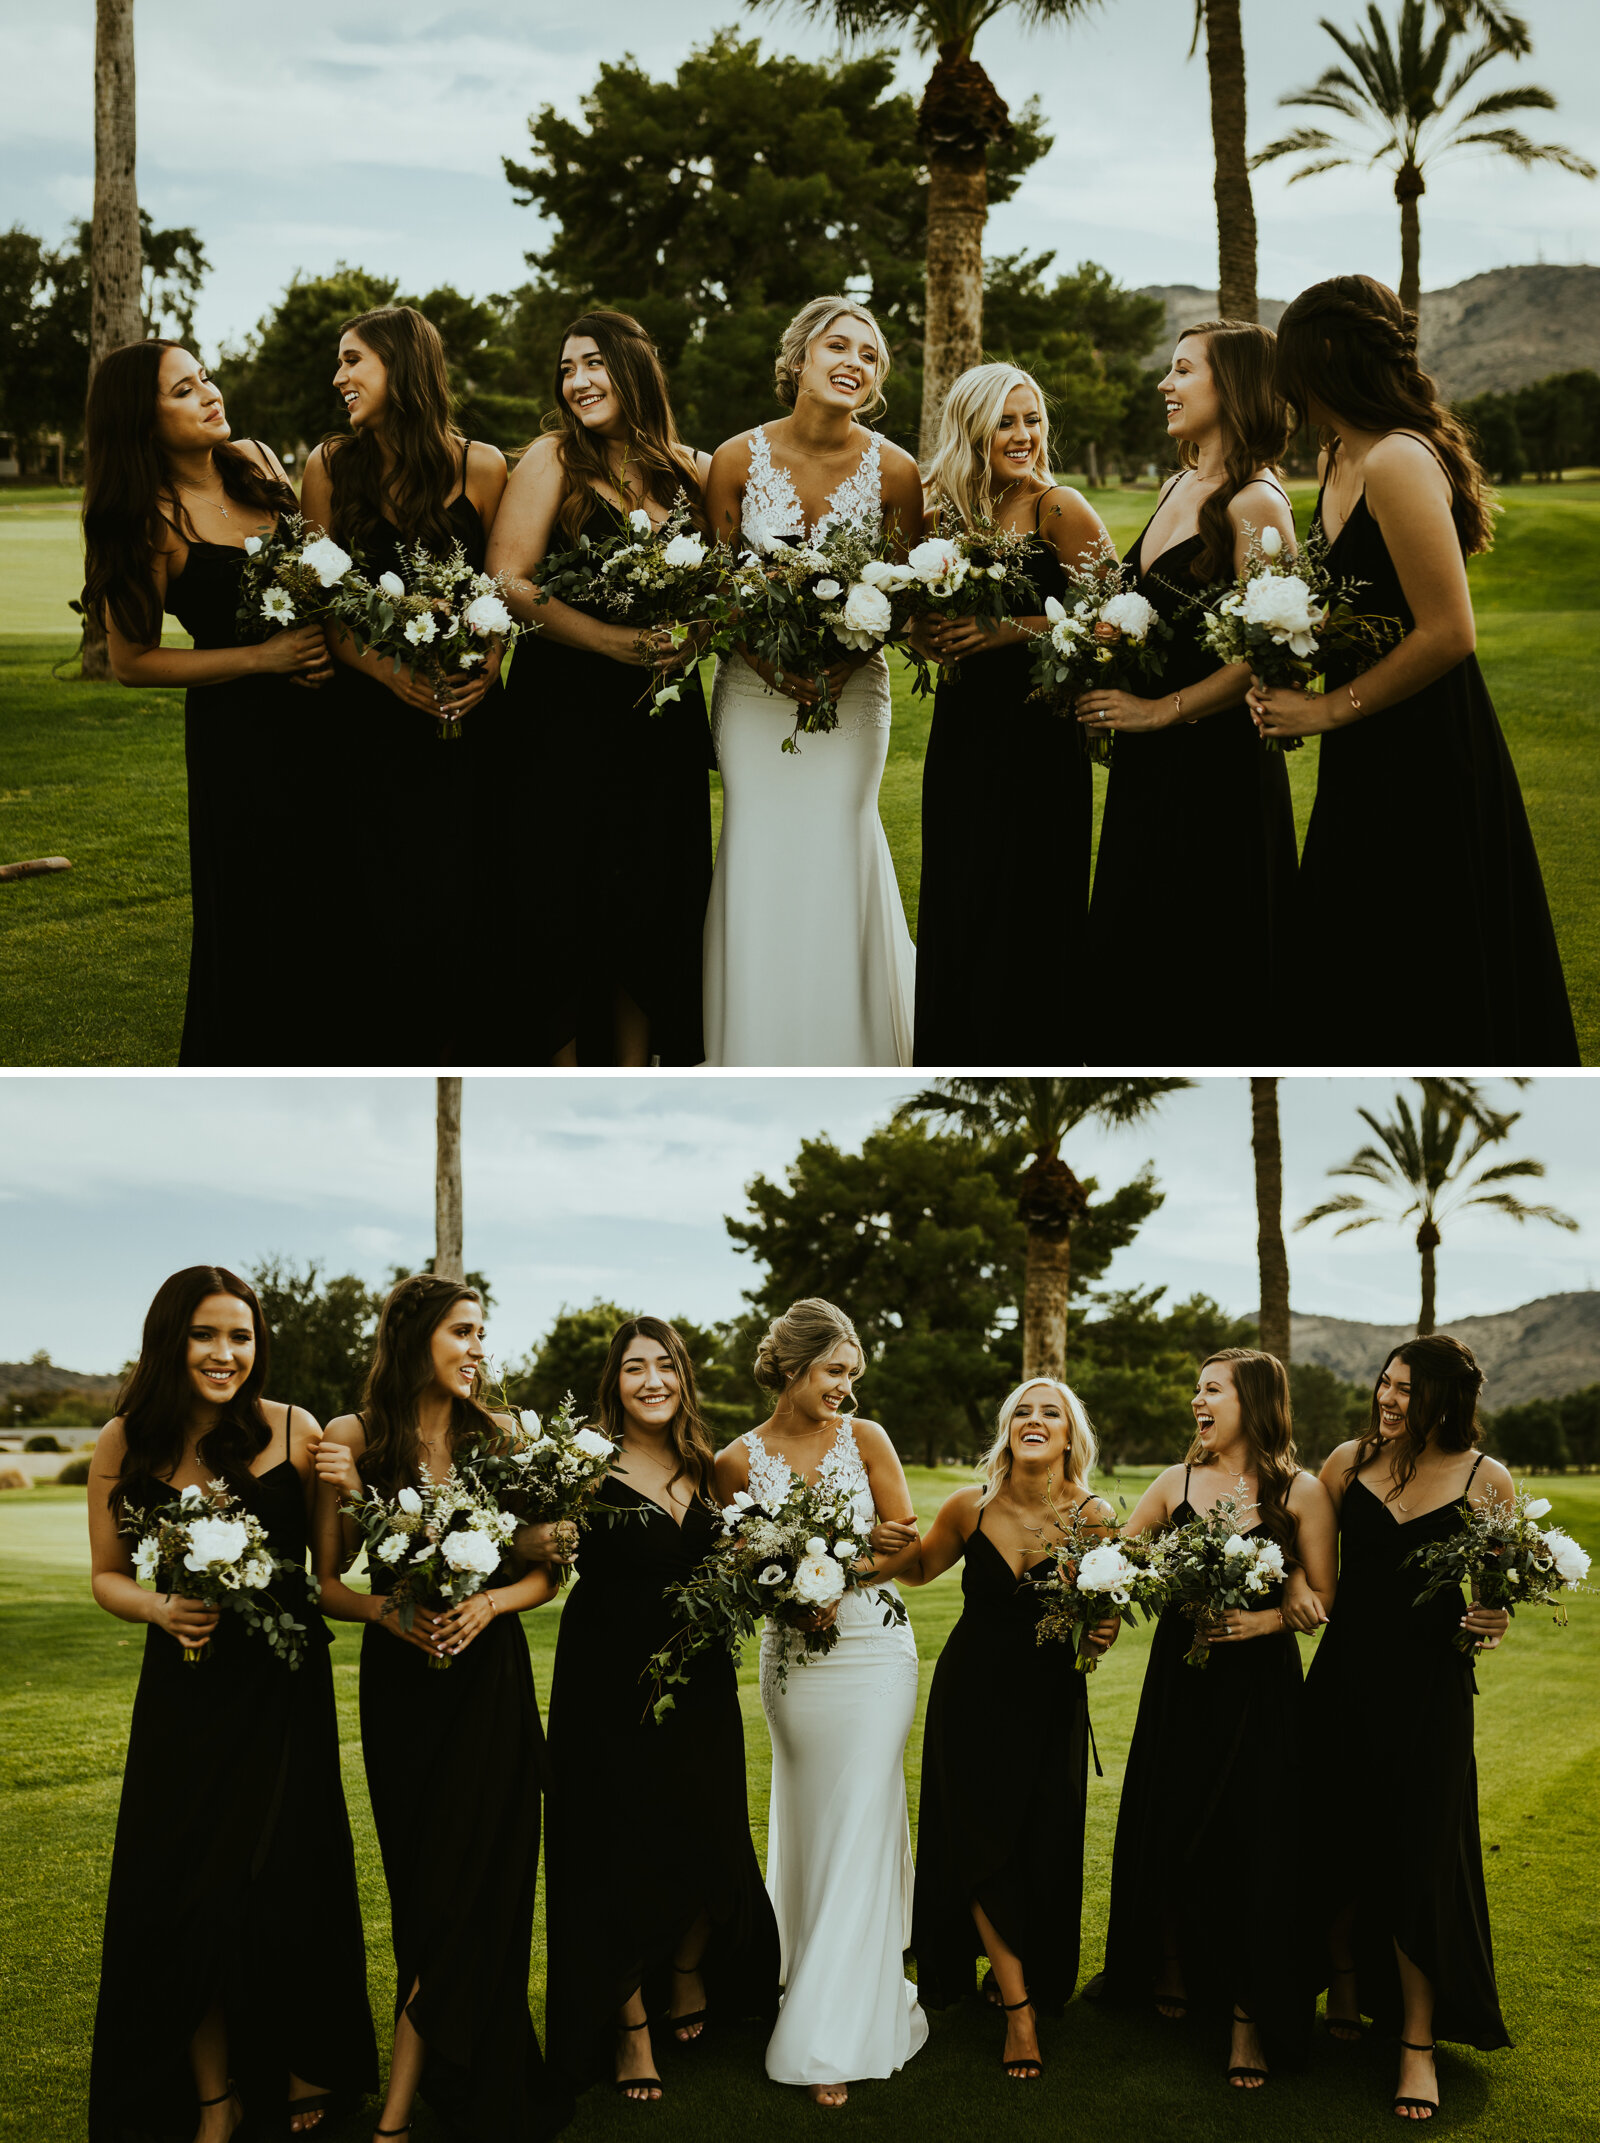 Bride and bridal party makeup inspiration. Makeup by bella bridal beauty based out of Arizona. Wedding party photography, bridesmaid style inspiration. .jpg